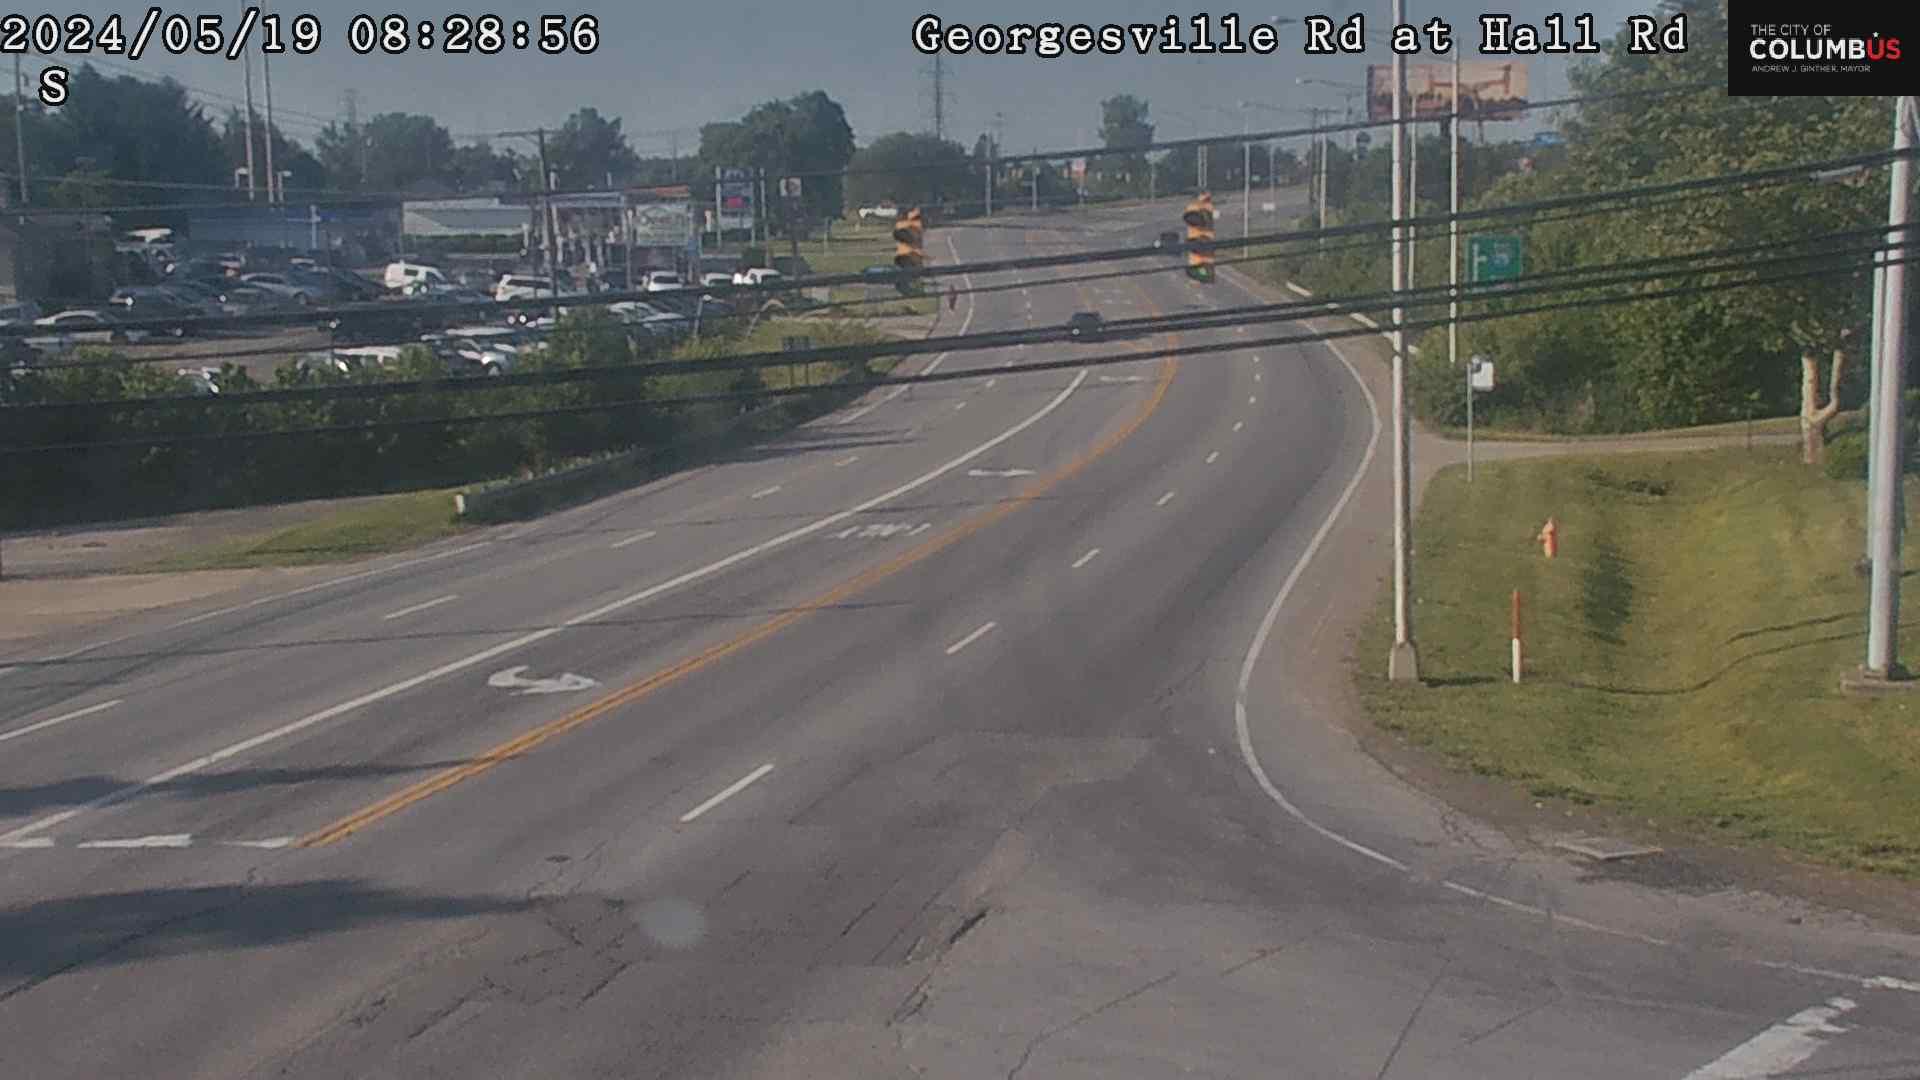 Traffic Cam Columbus: City of - Georgesville Rd at Hall Rd